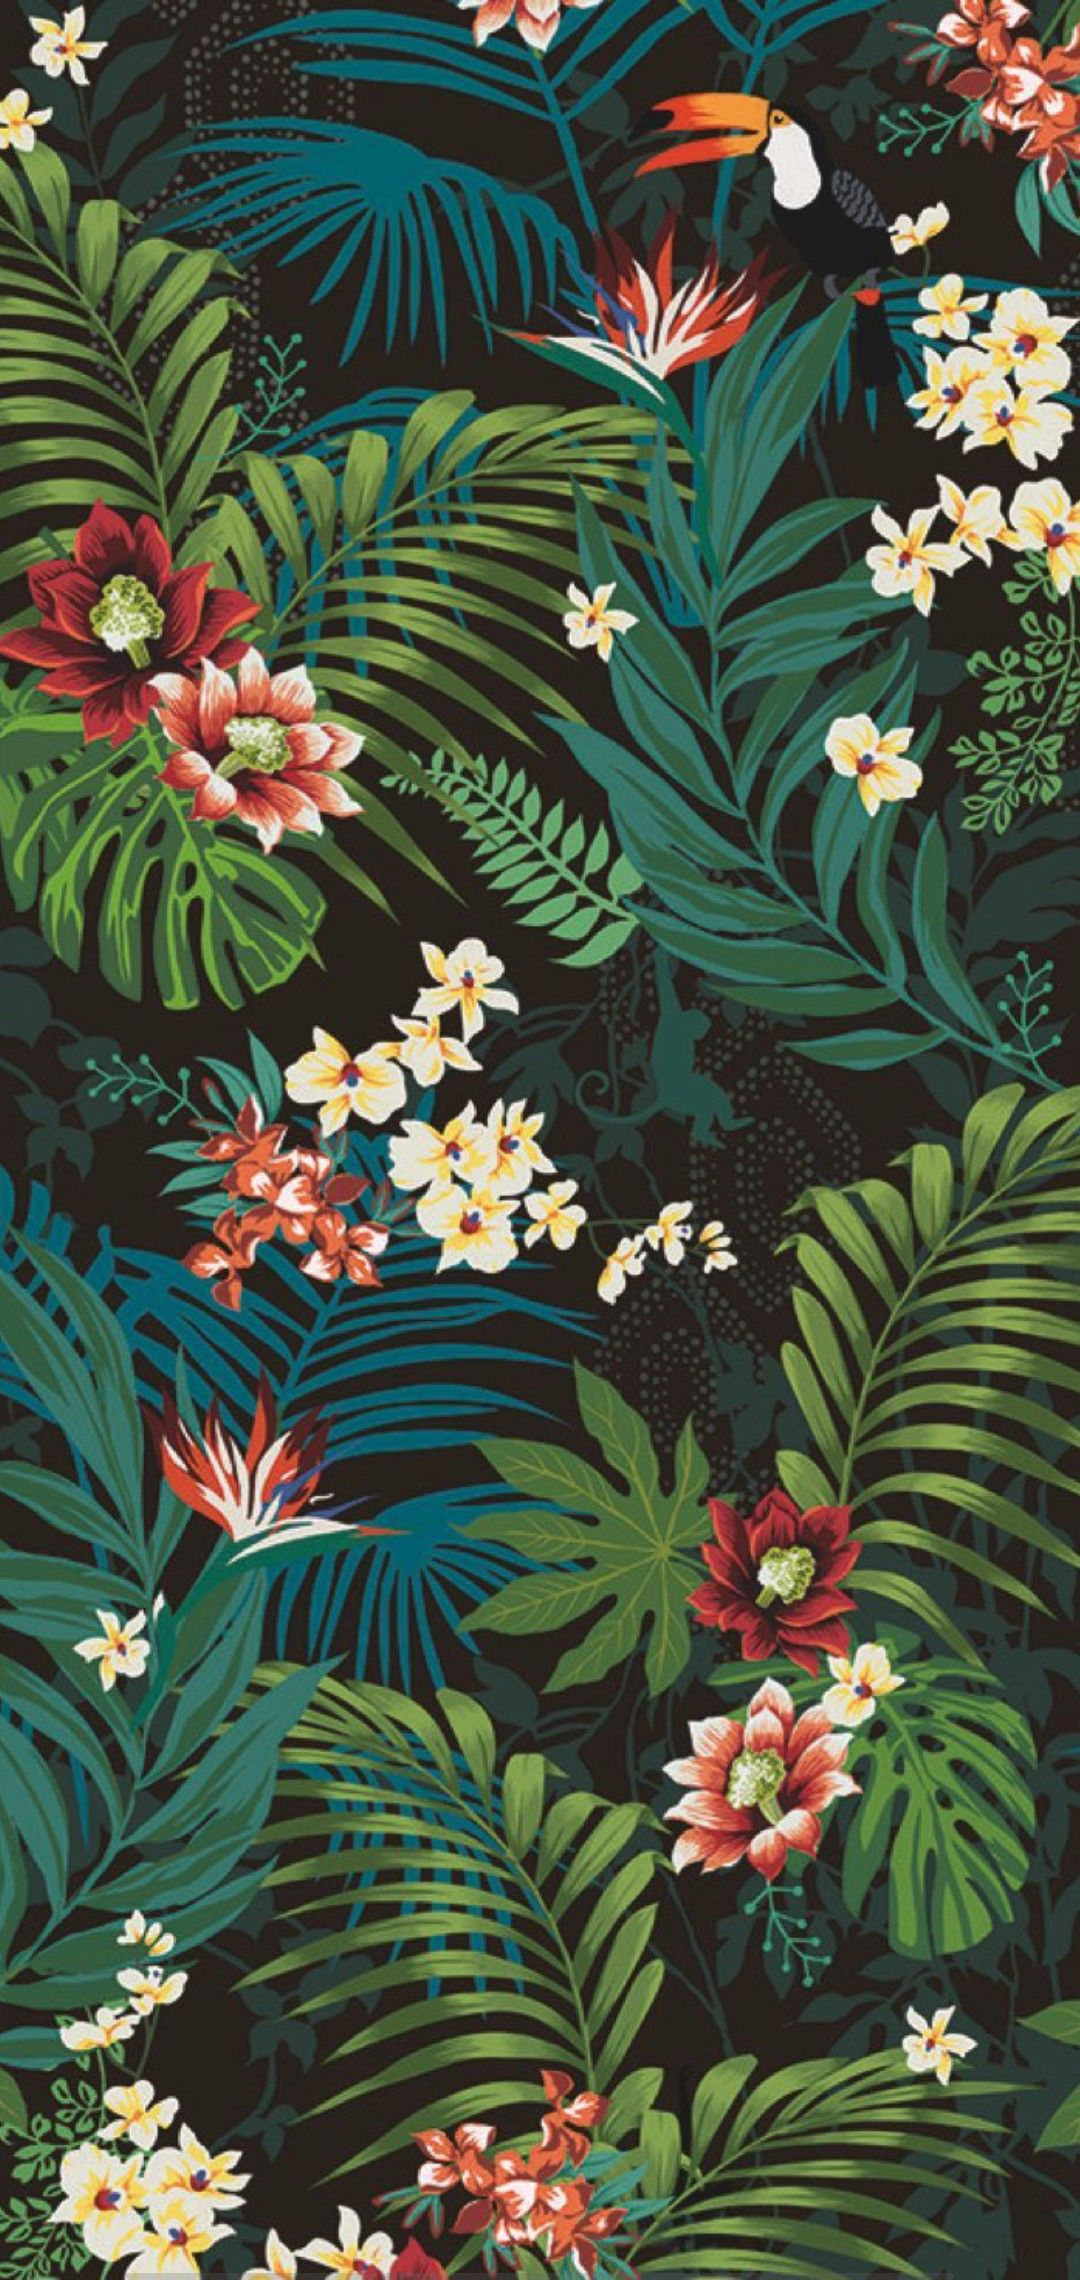 1080x2280 Pin by Vincent Lim on Wallpapers | Tropical wallpaper, Jungle pattern, Flower wallpaper